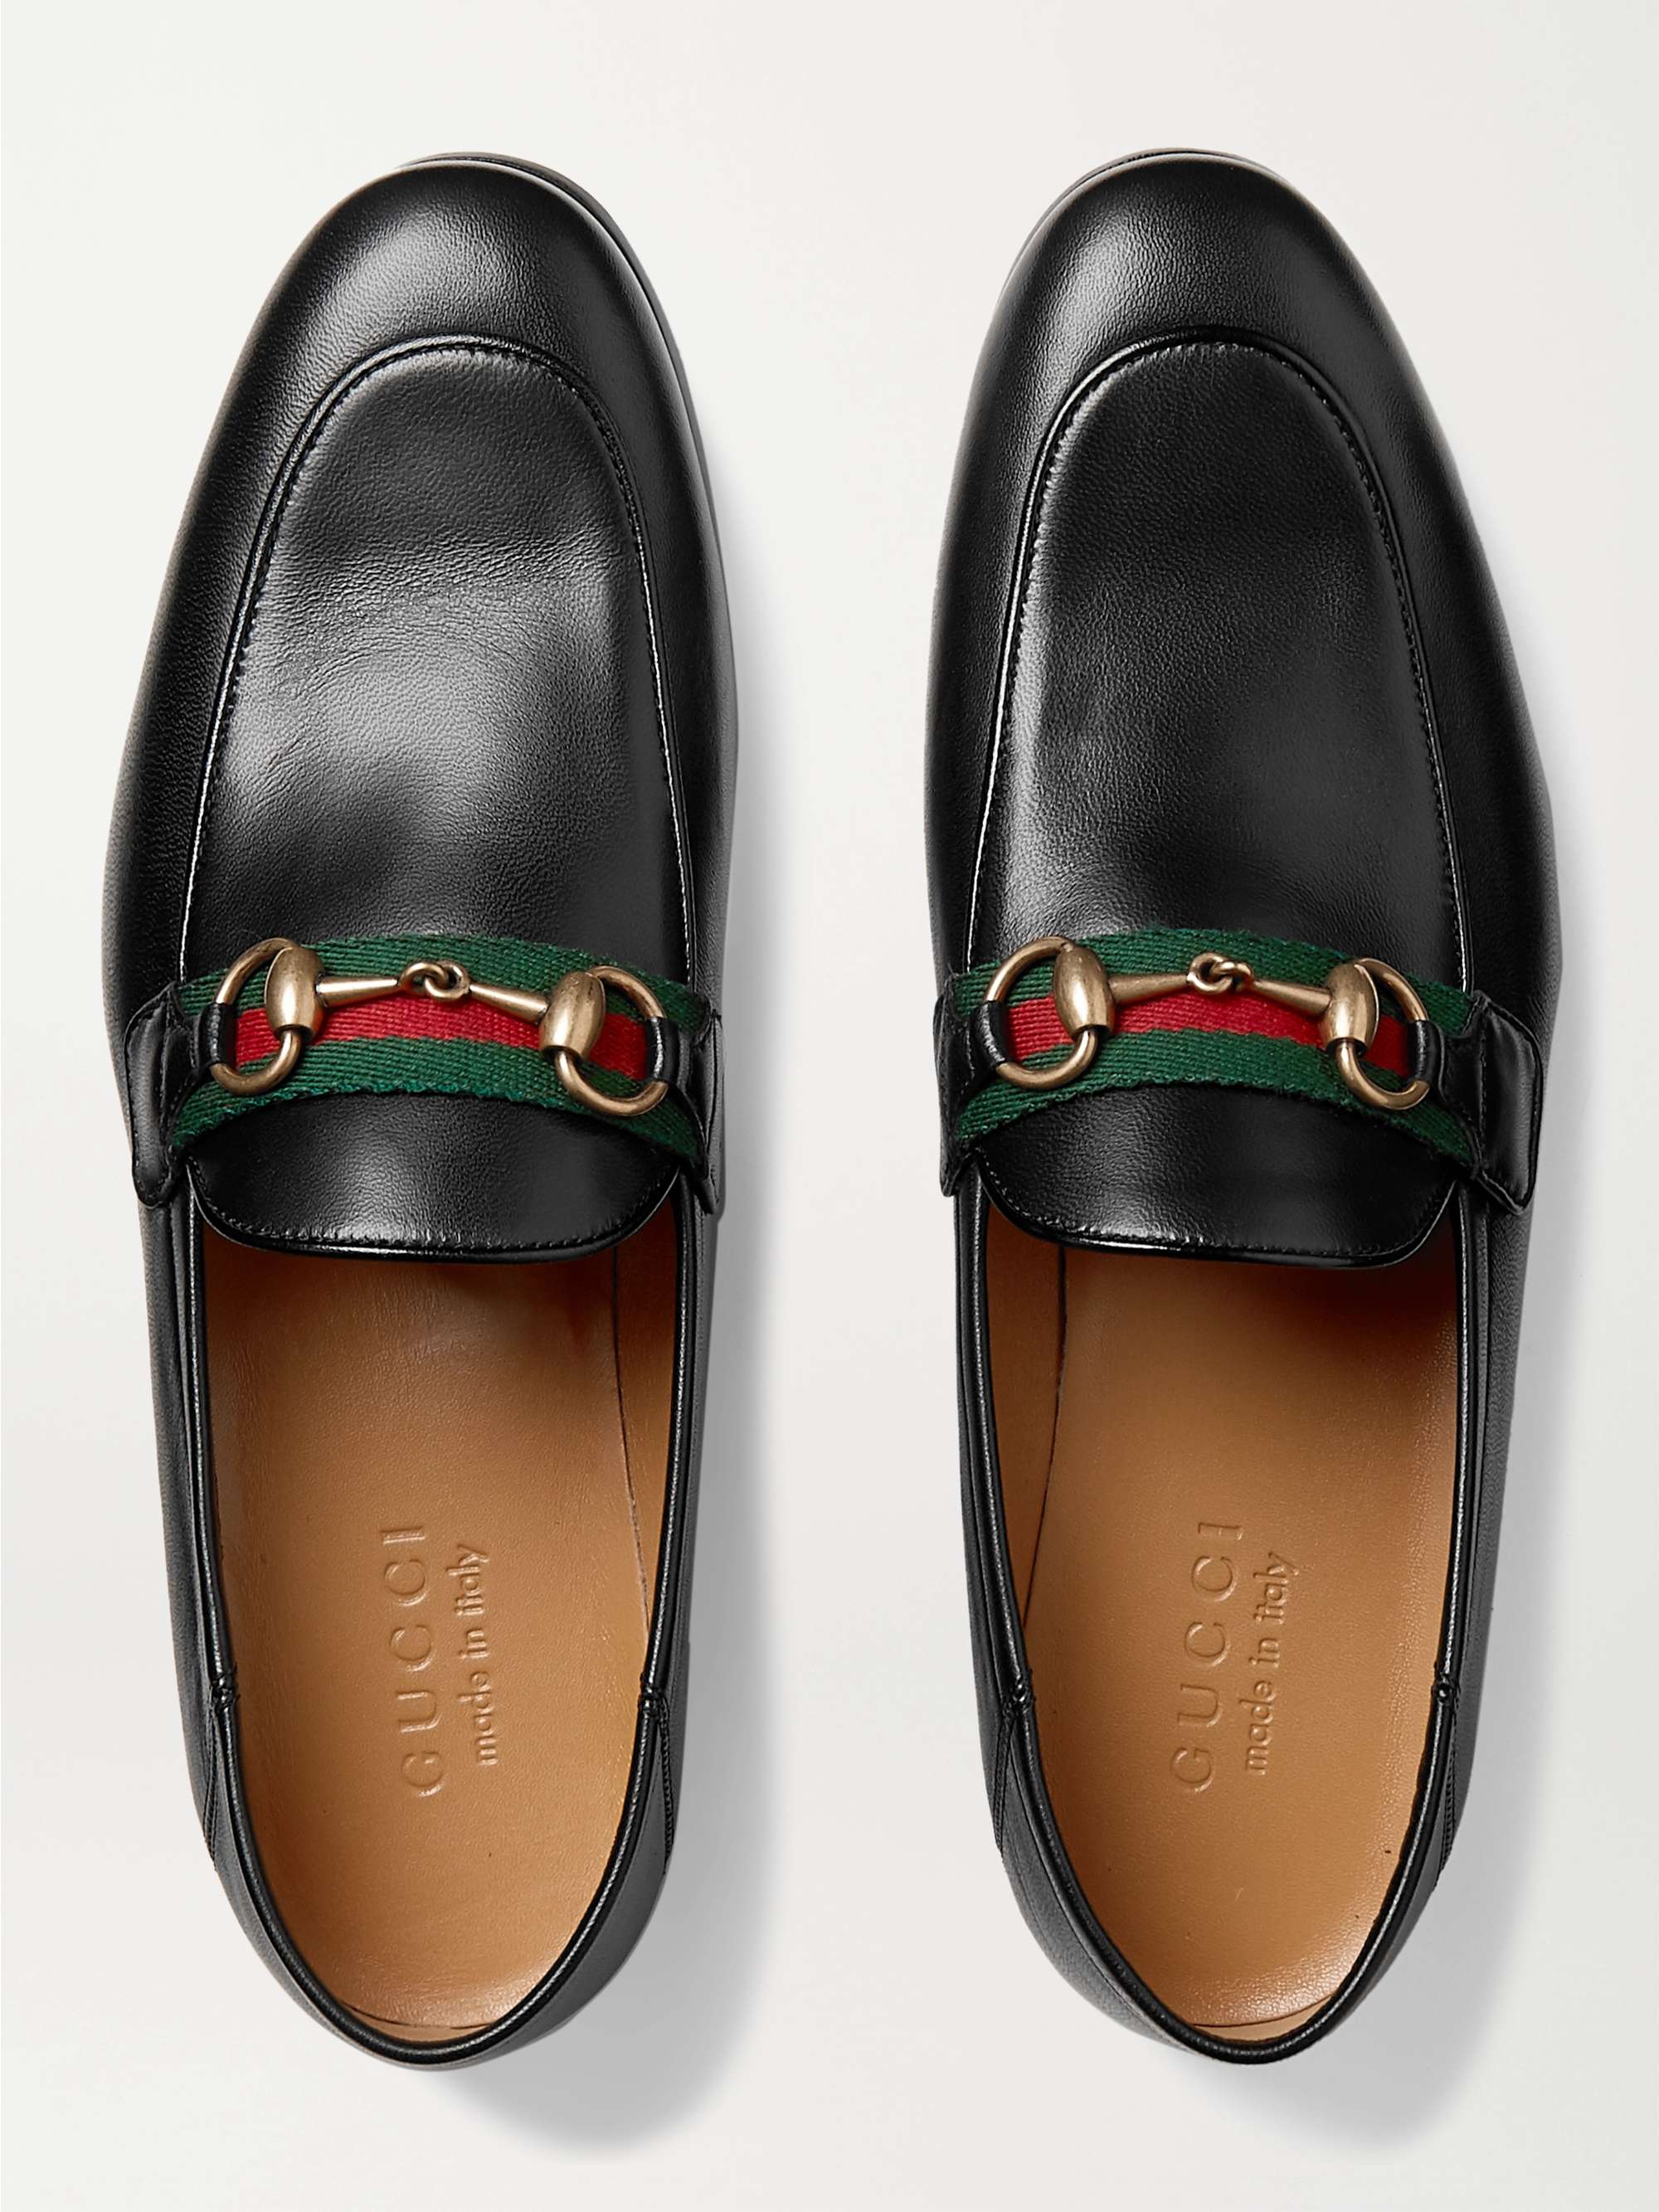 GUCCI Brixton Webbing-Trimmed Horsebit Collapsible-Heel Leather Loafers